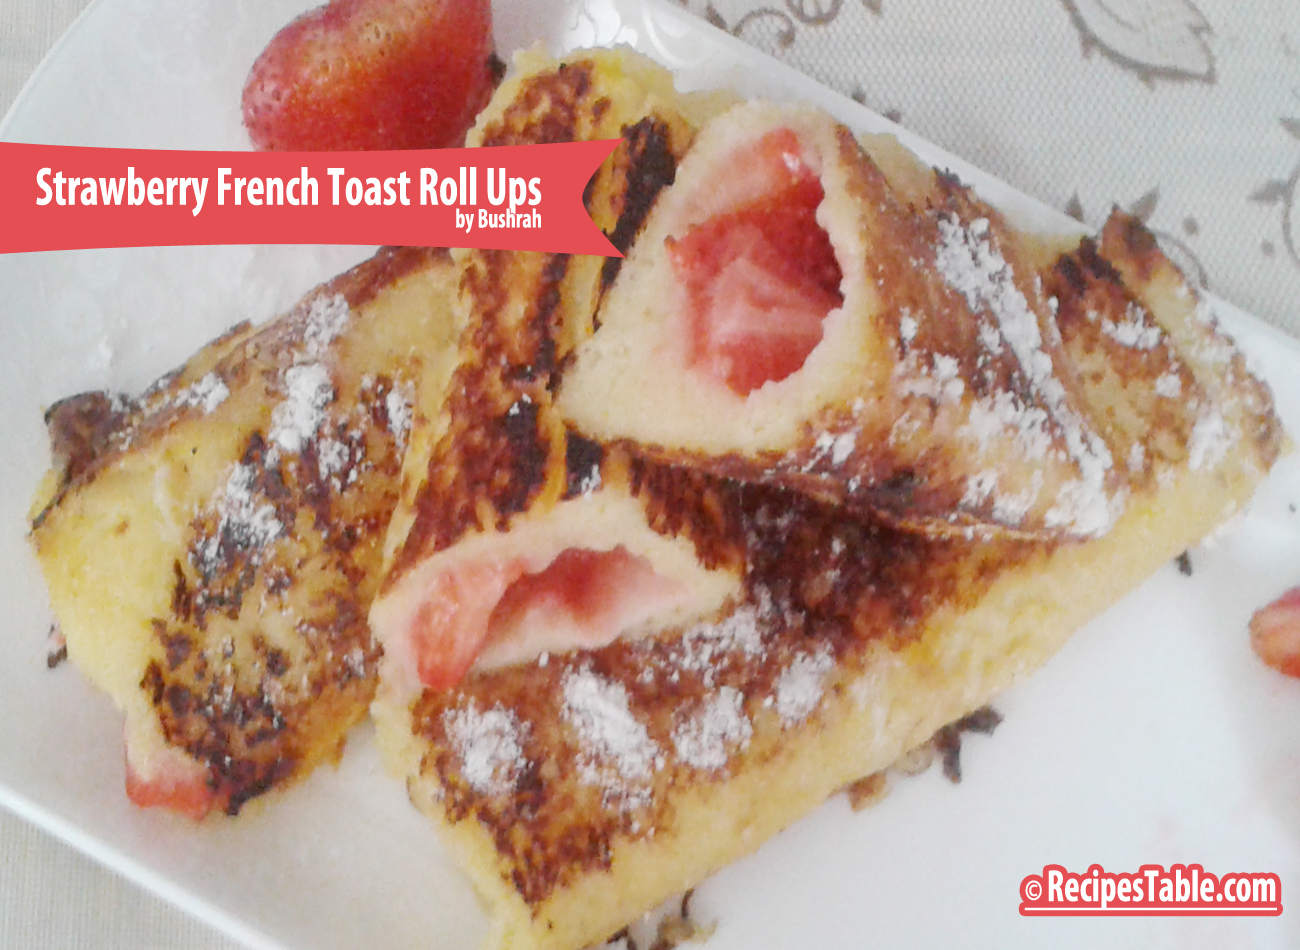 Strawberry French Toast Roll Ups Recipe